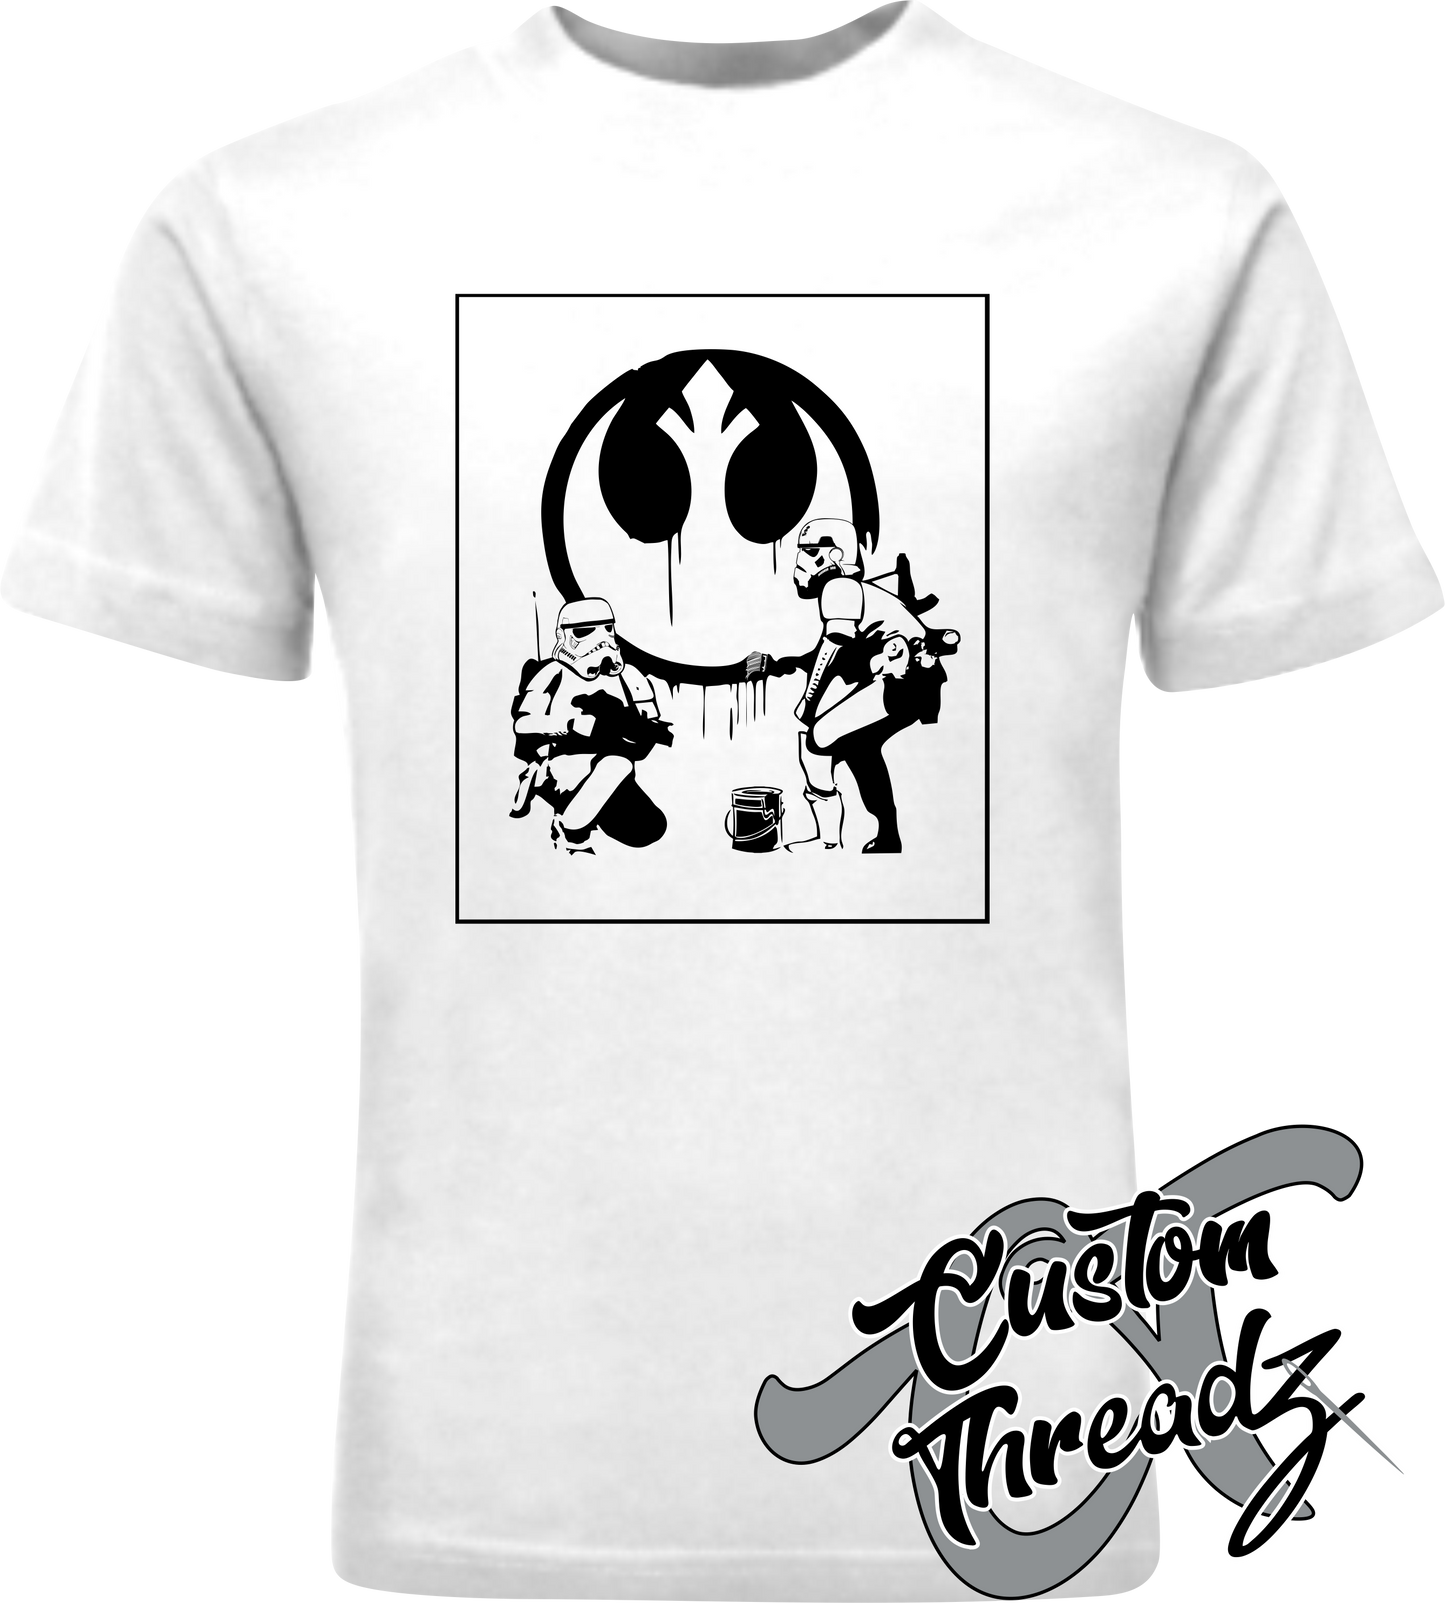 white youth tee with stormtroopers rebel alliance star wars DTG printed design